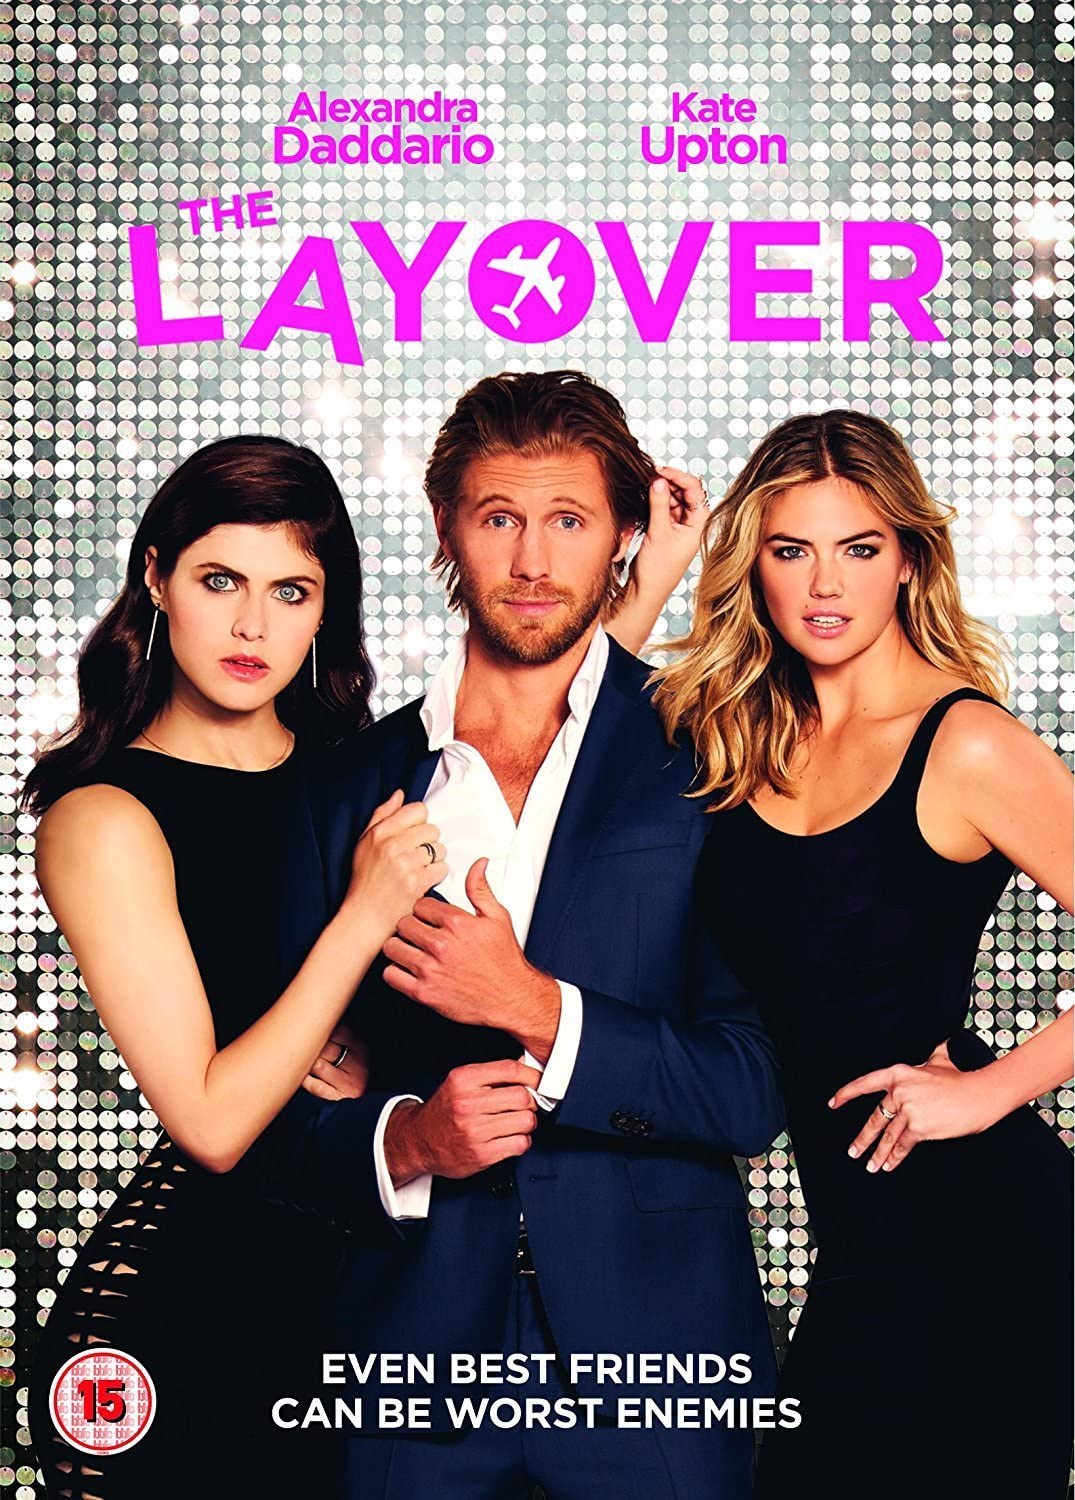 The Layover - Comedy [DVD]